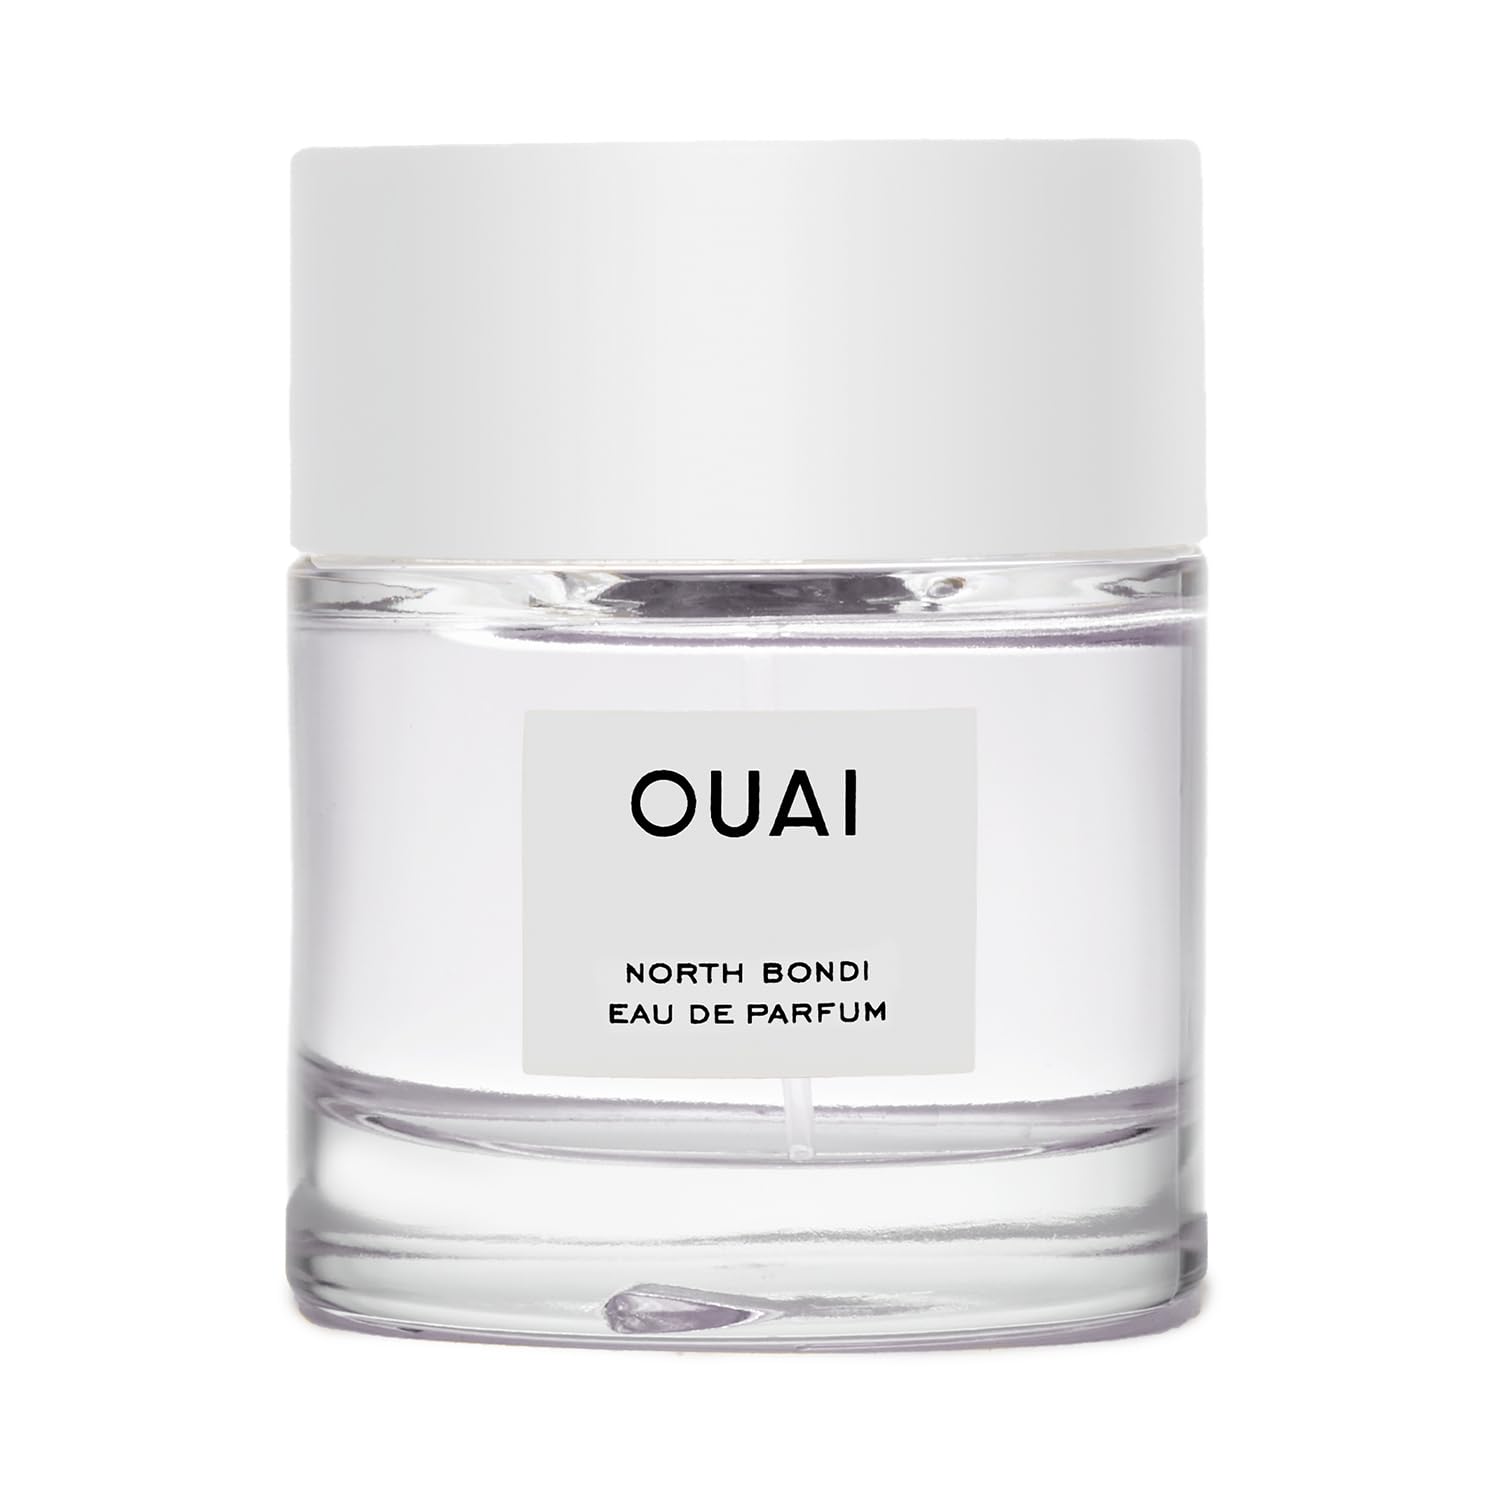 OUAI North Bondi Eau de Parfum - Elegant Womens Perfume for Everyday Wear - Fresh Floral Scent has Notes of Lemon, Jasmine and Bergamot with Delicate Hints of Violet and White Musk (1.7 Oz)